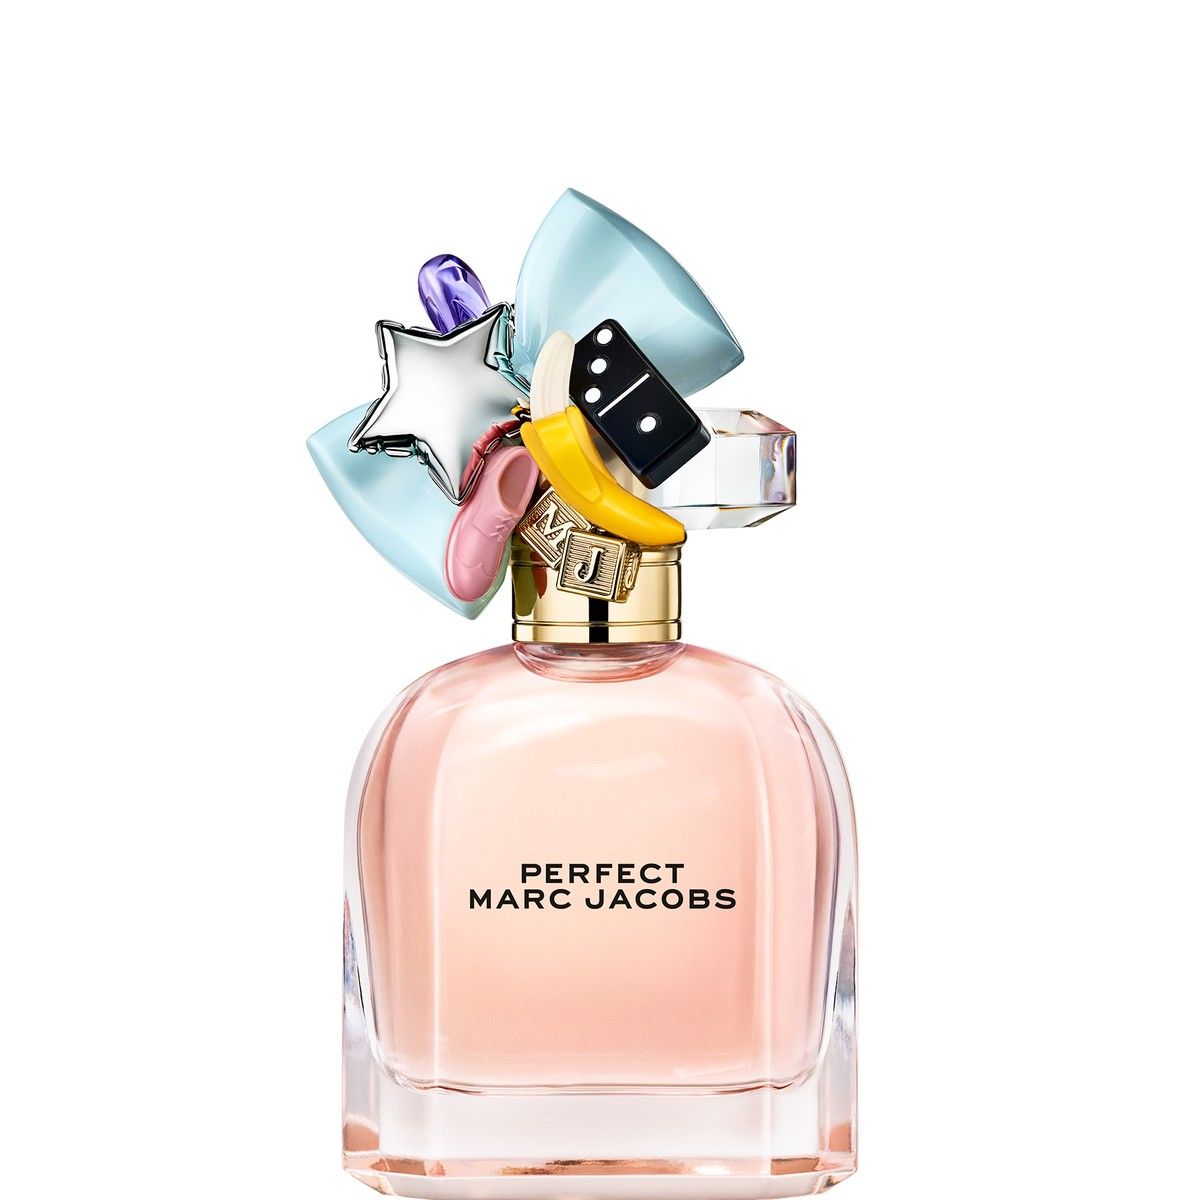 Парфюмерная вода Marc Jacobs Perfect 50 мл